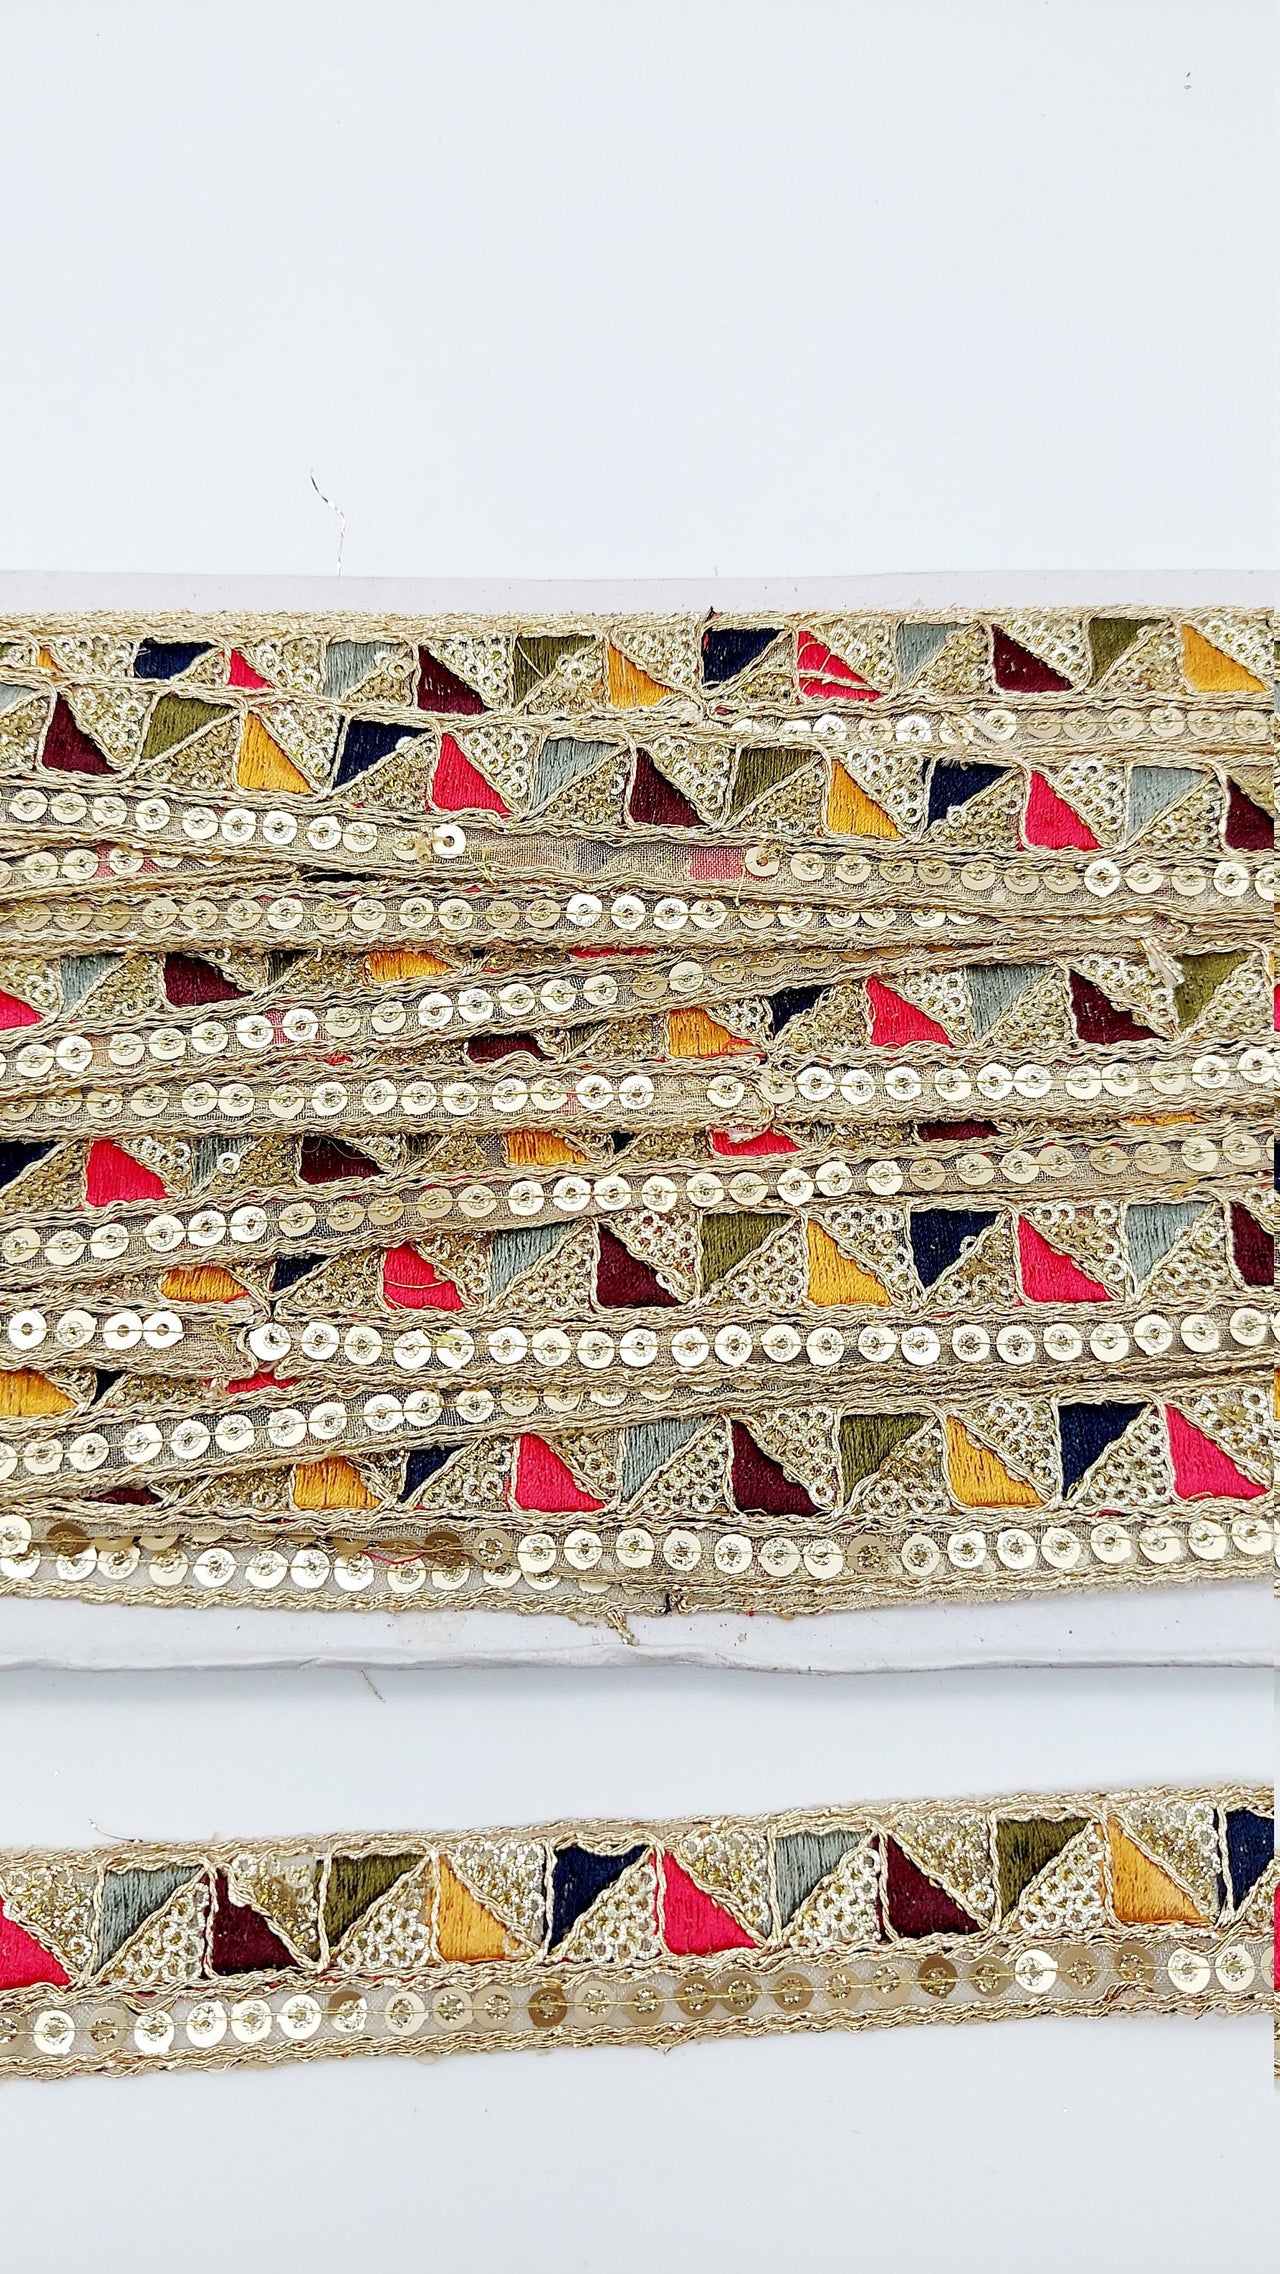 Gold Sequin Border With Multicoloured Triangle Embroidery, Beige Shimmer Lace Trim, Decorative Trim